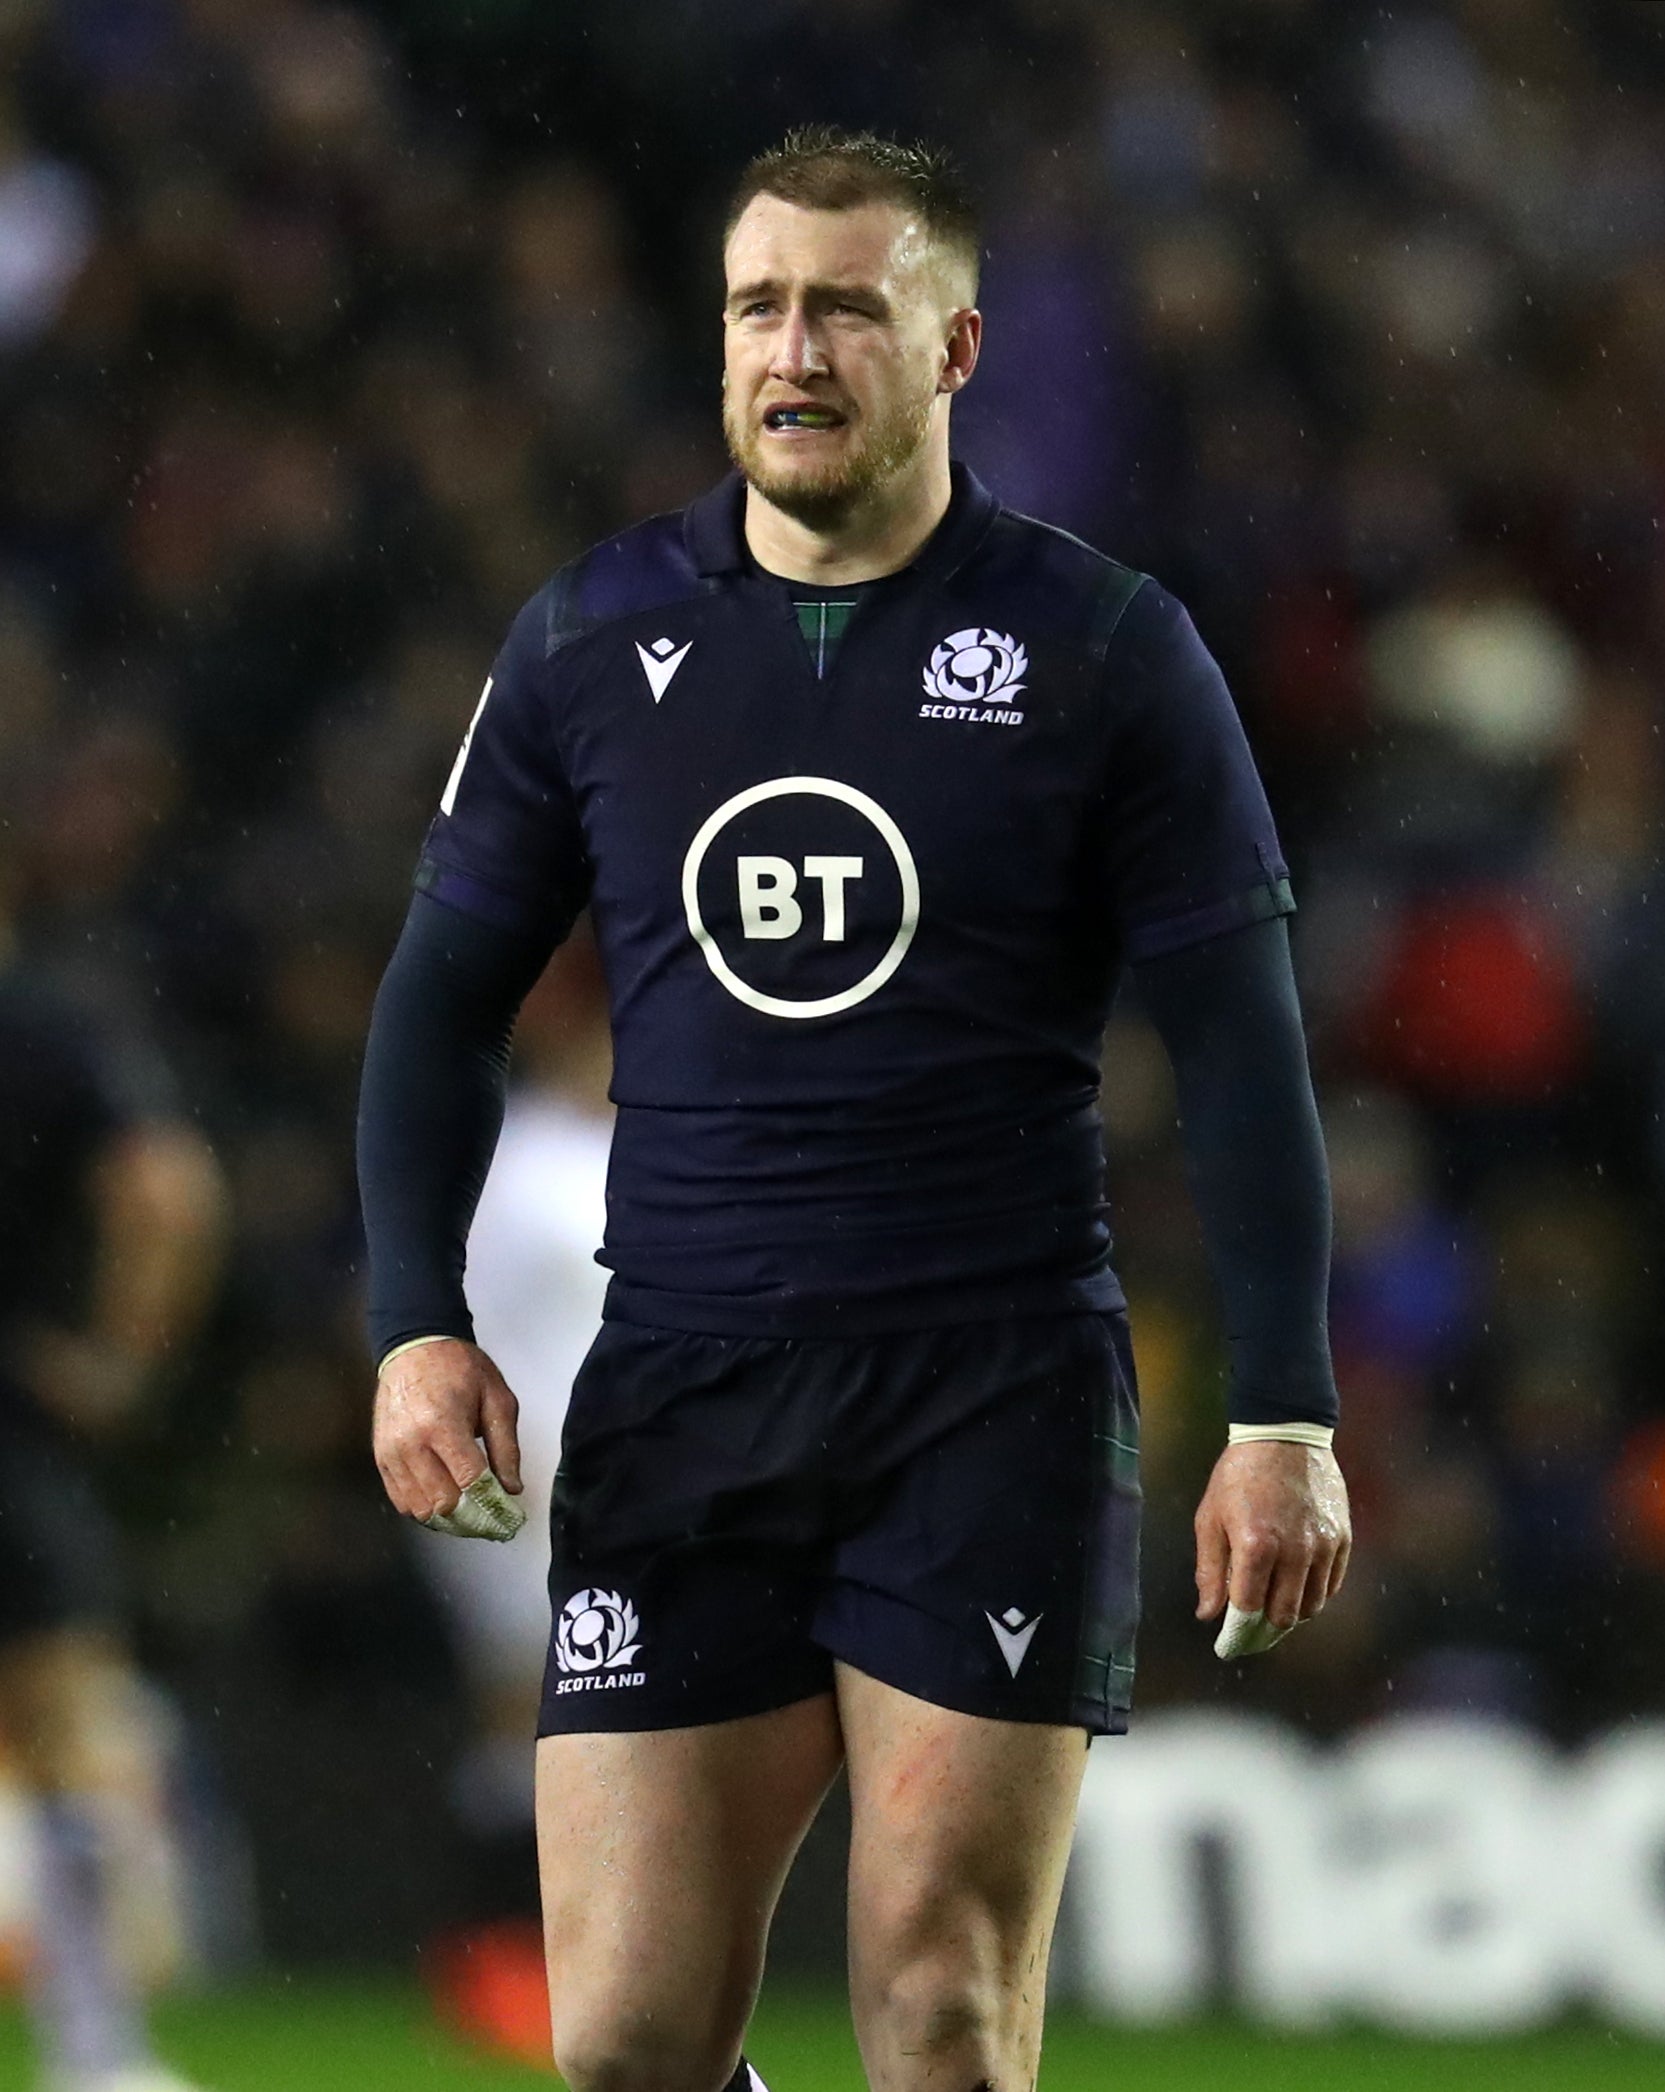 Scotland captain Stuart Hogg thinks victory against Australia would show they belong among Test rugby’s elite (Andrew Milligan/PA)